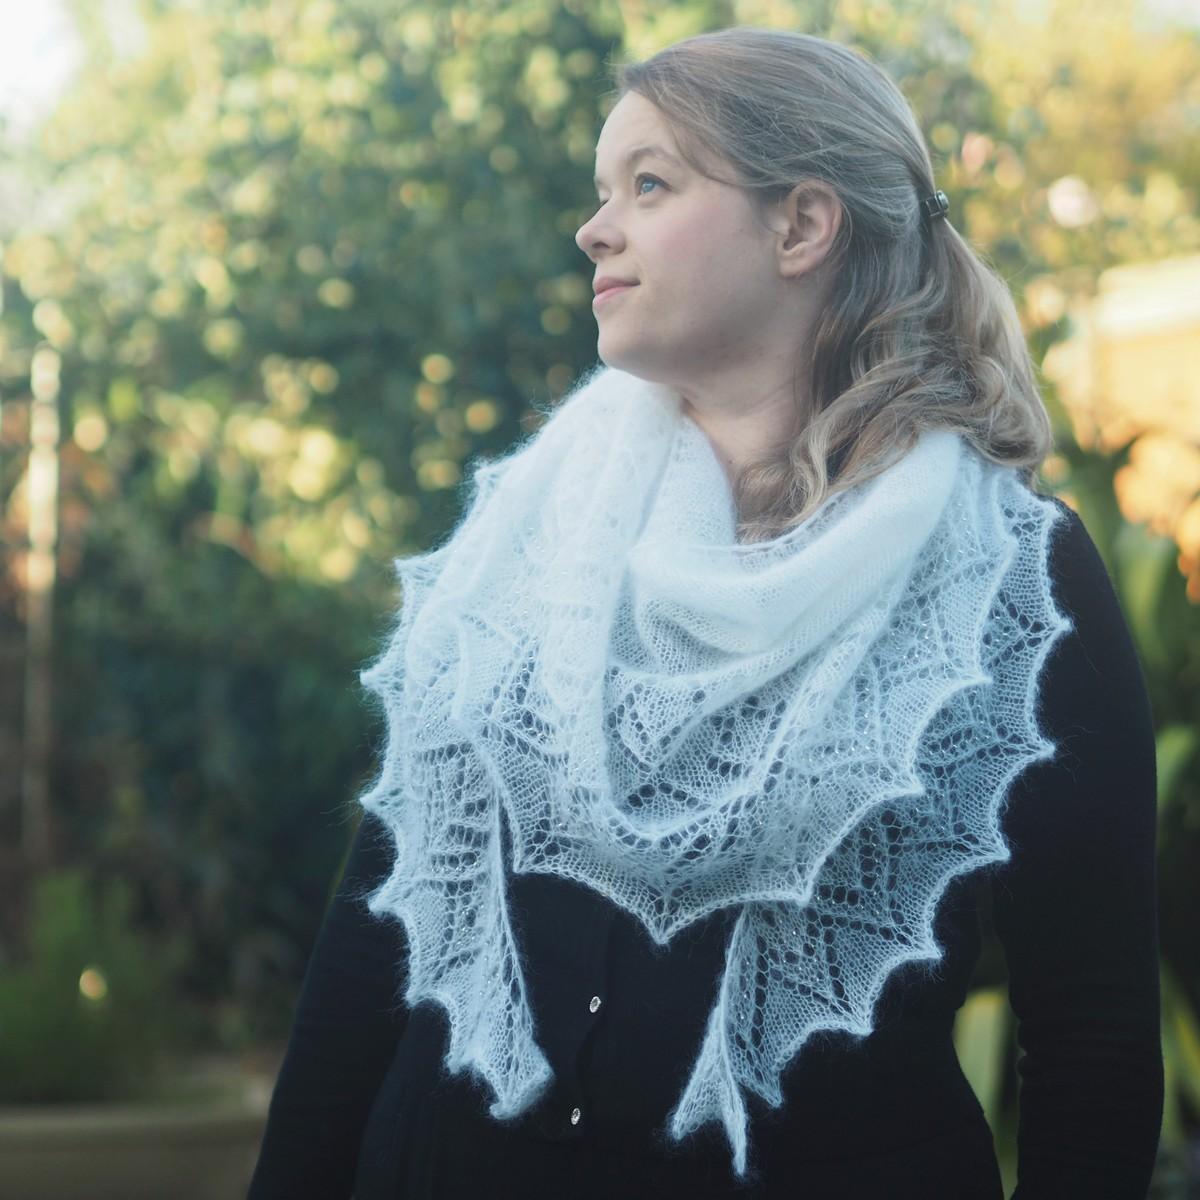 white mohair lace crescent shawl being worn bandana style